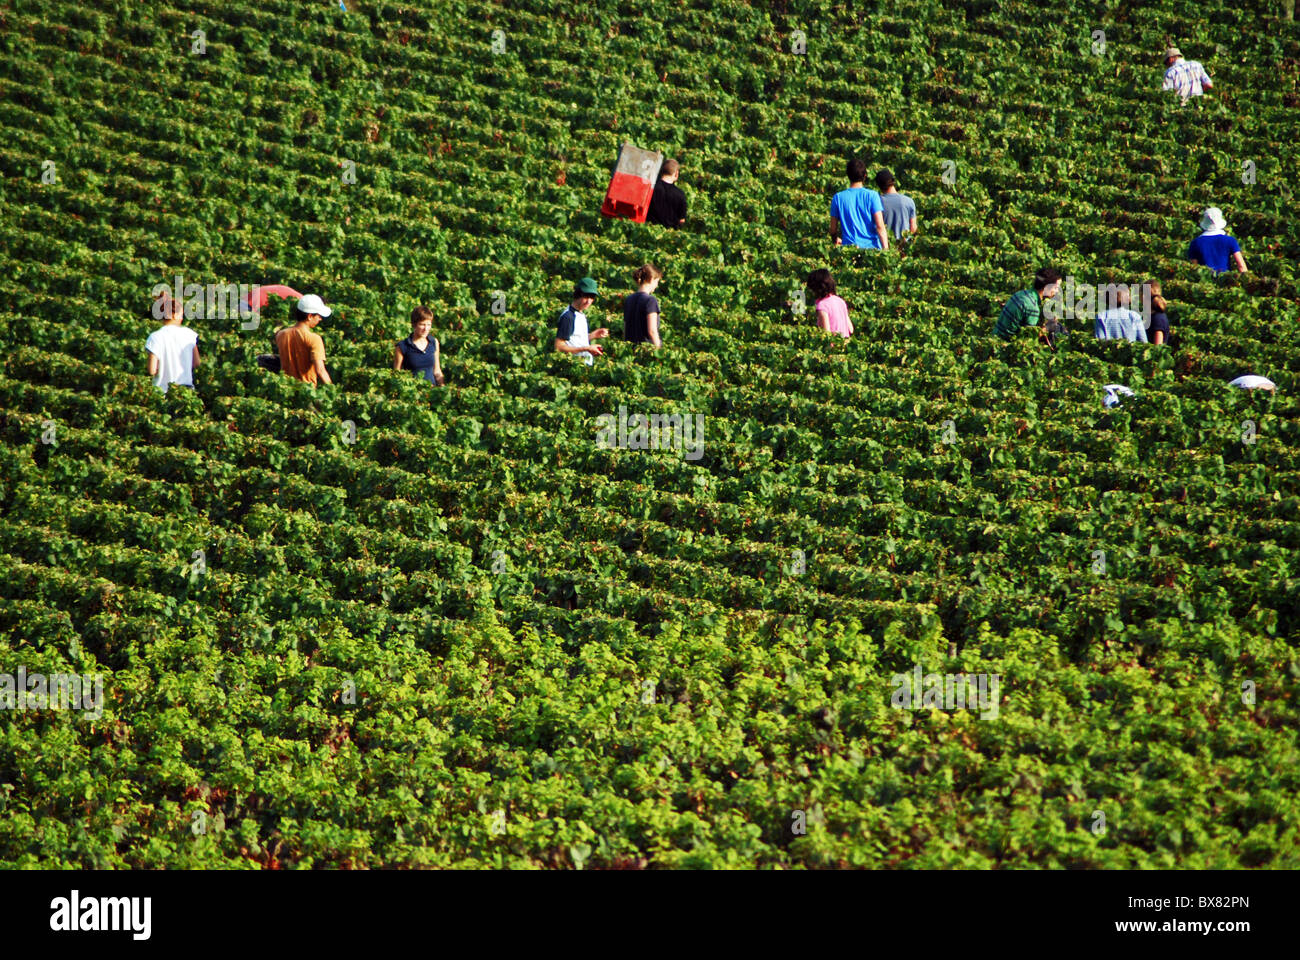 Grape pickers among the vines, Volnay, Burgundy, France Stock Photo